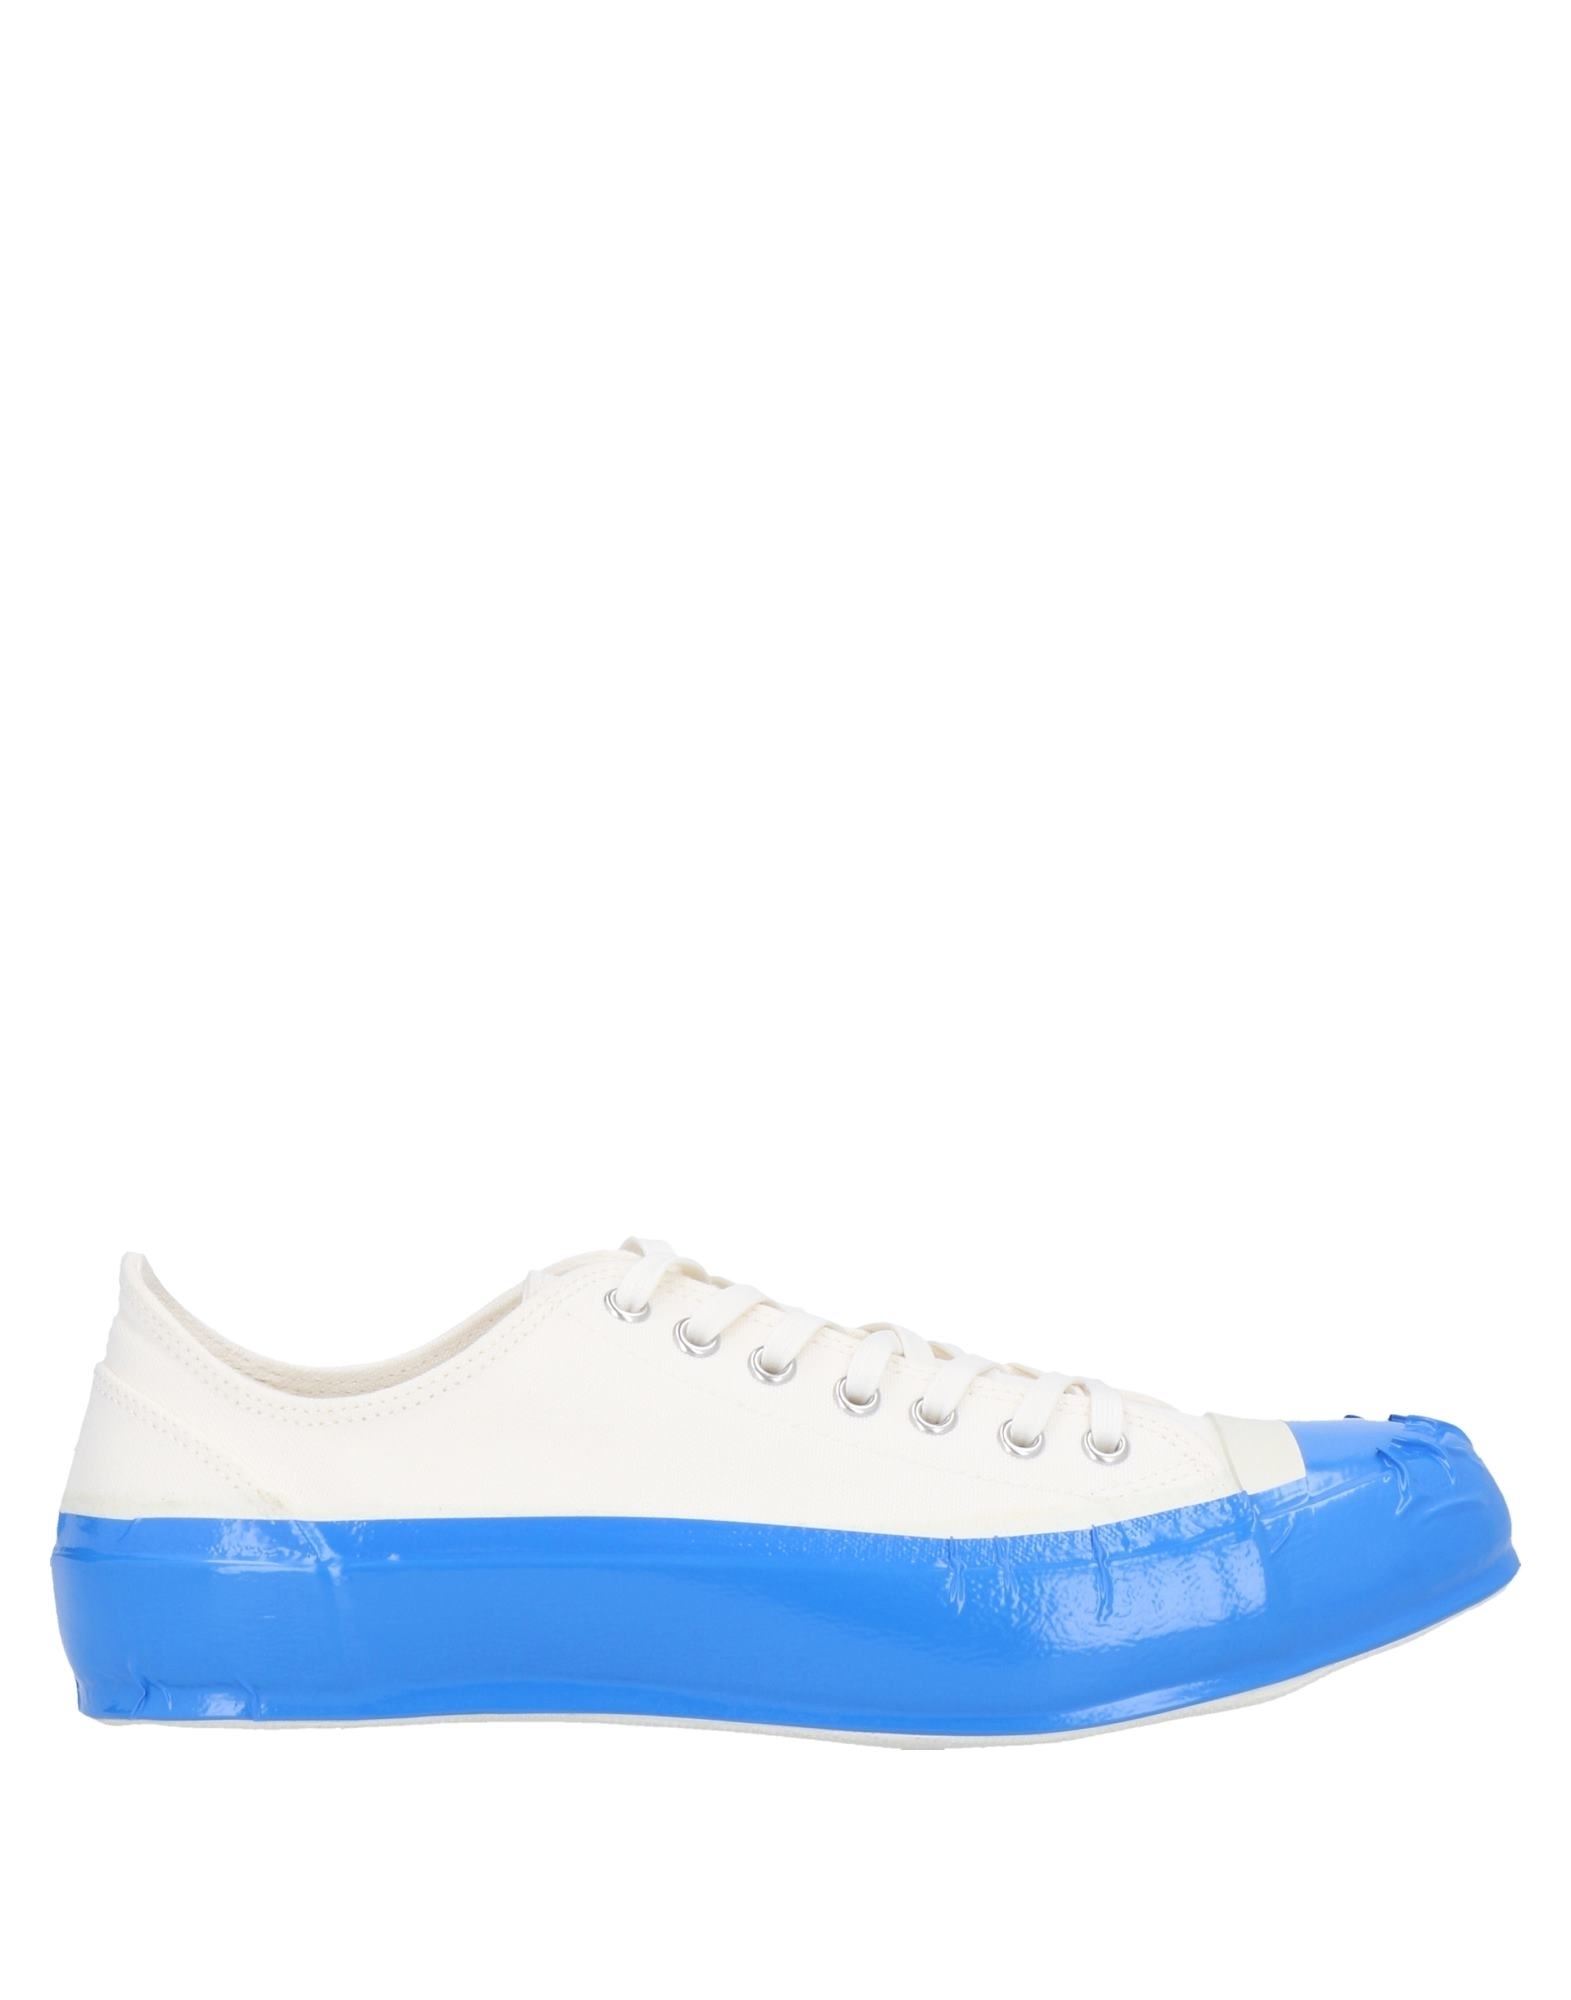 Comme Des Garçons Shirt X Spingle Tape' Canvas Sneakers In White | ModeSens